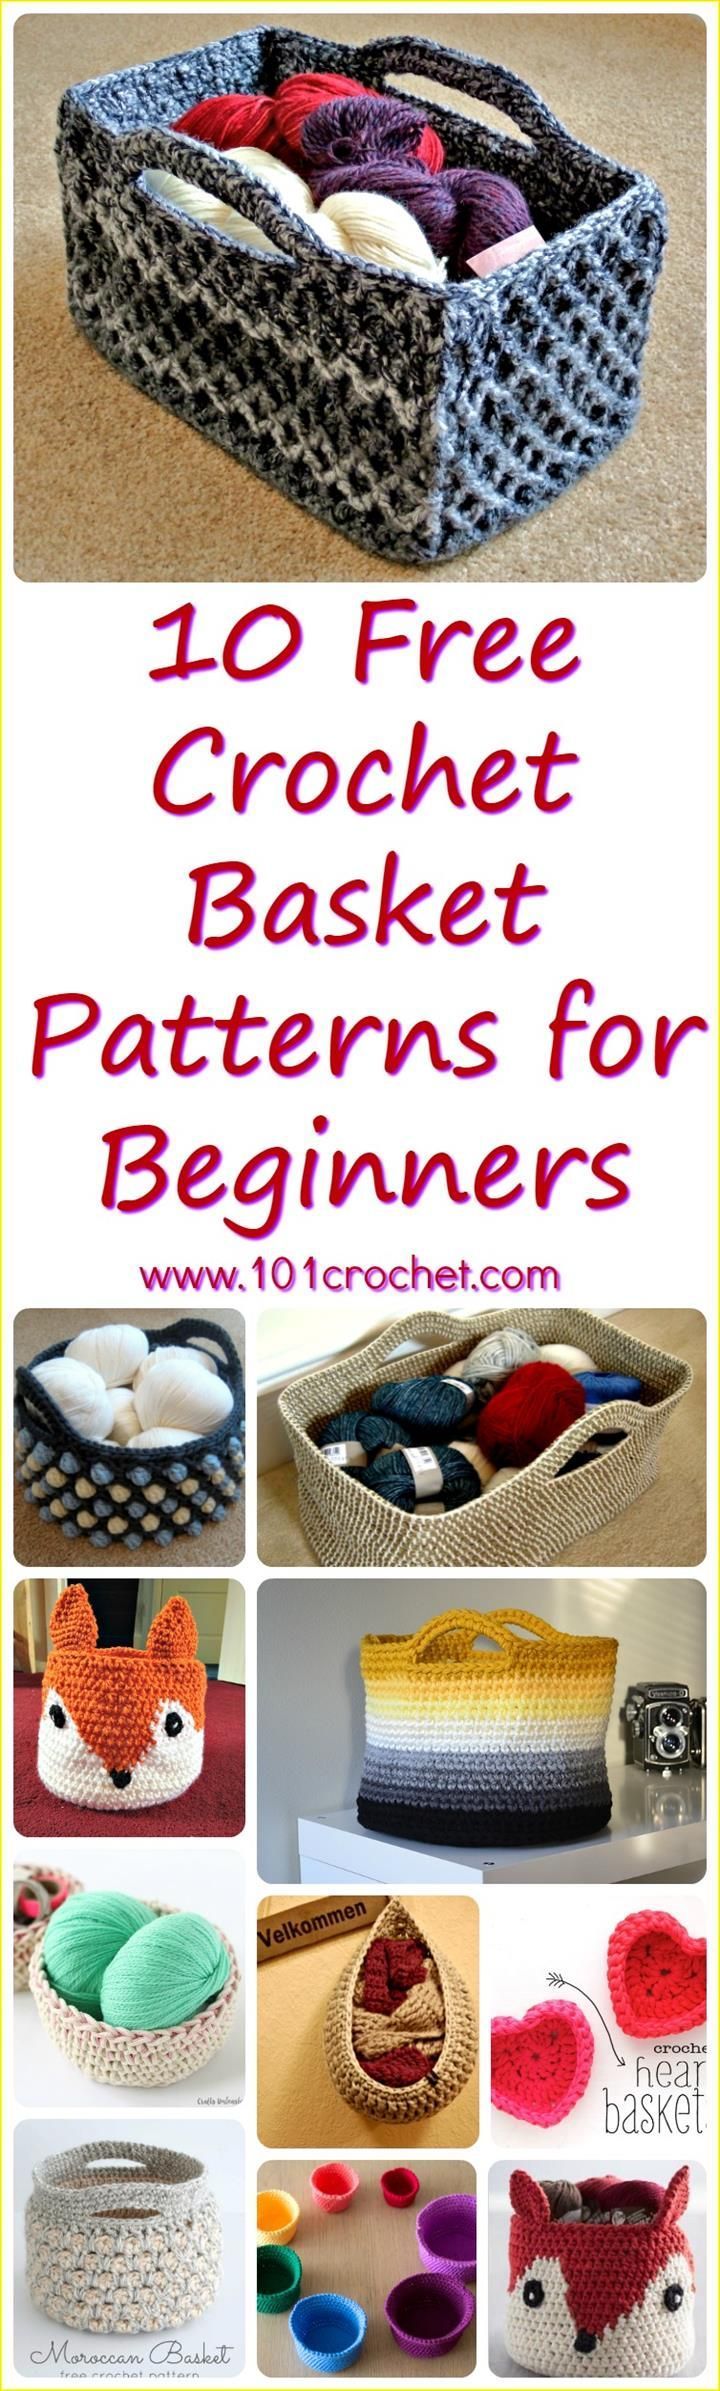 10 Free Crochet Basket Patterns for Beginners | Keep your home tidy with these great free patterns!